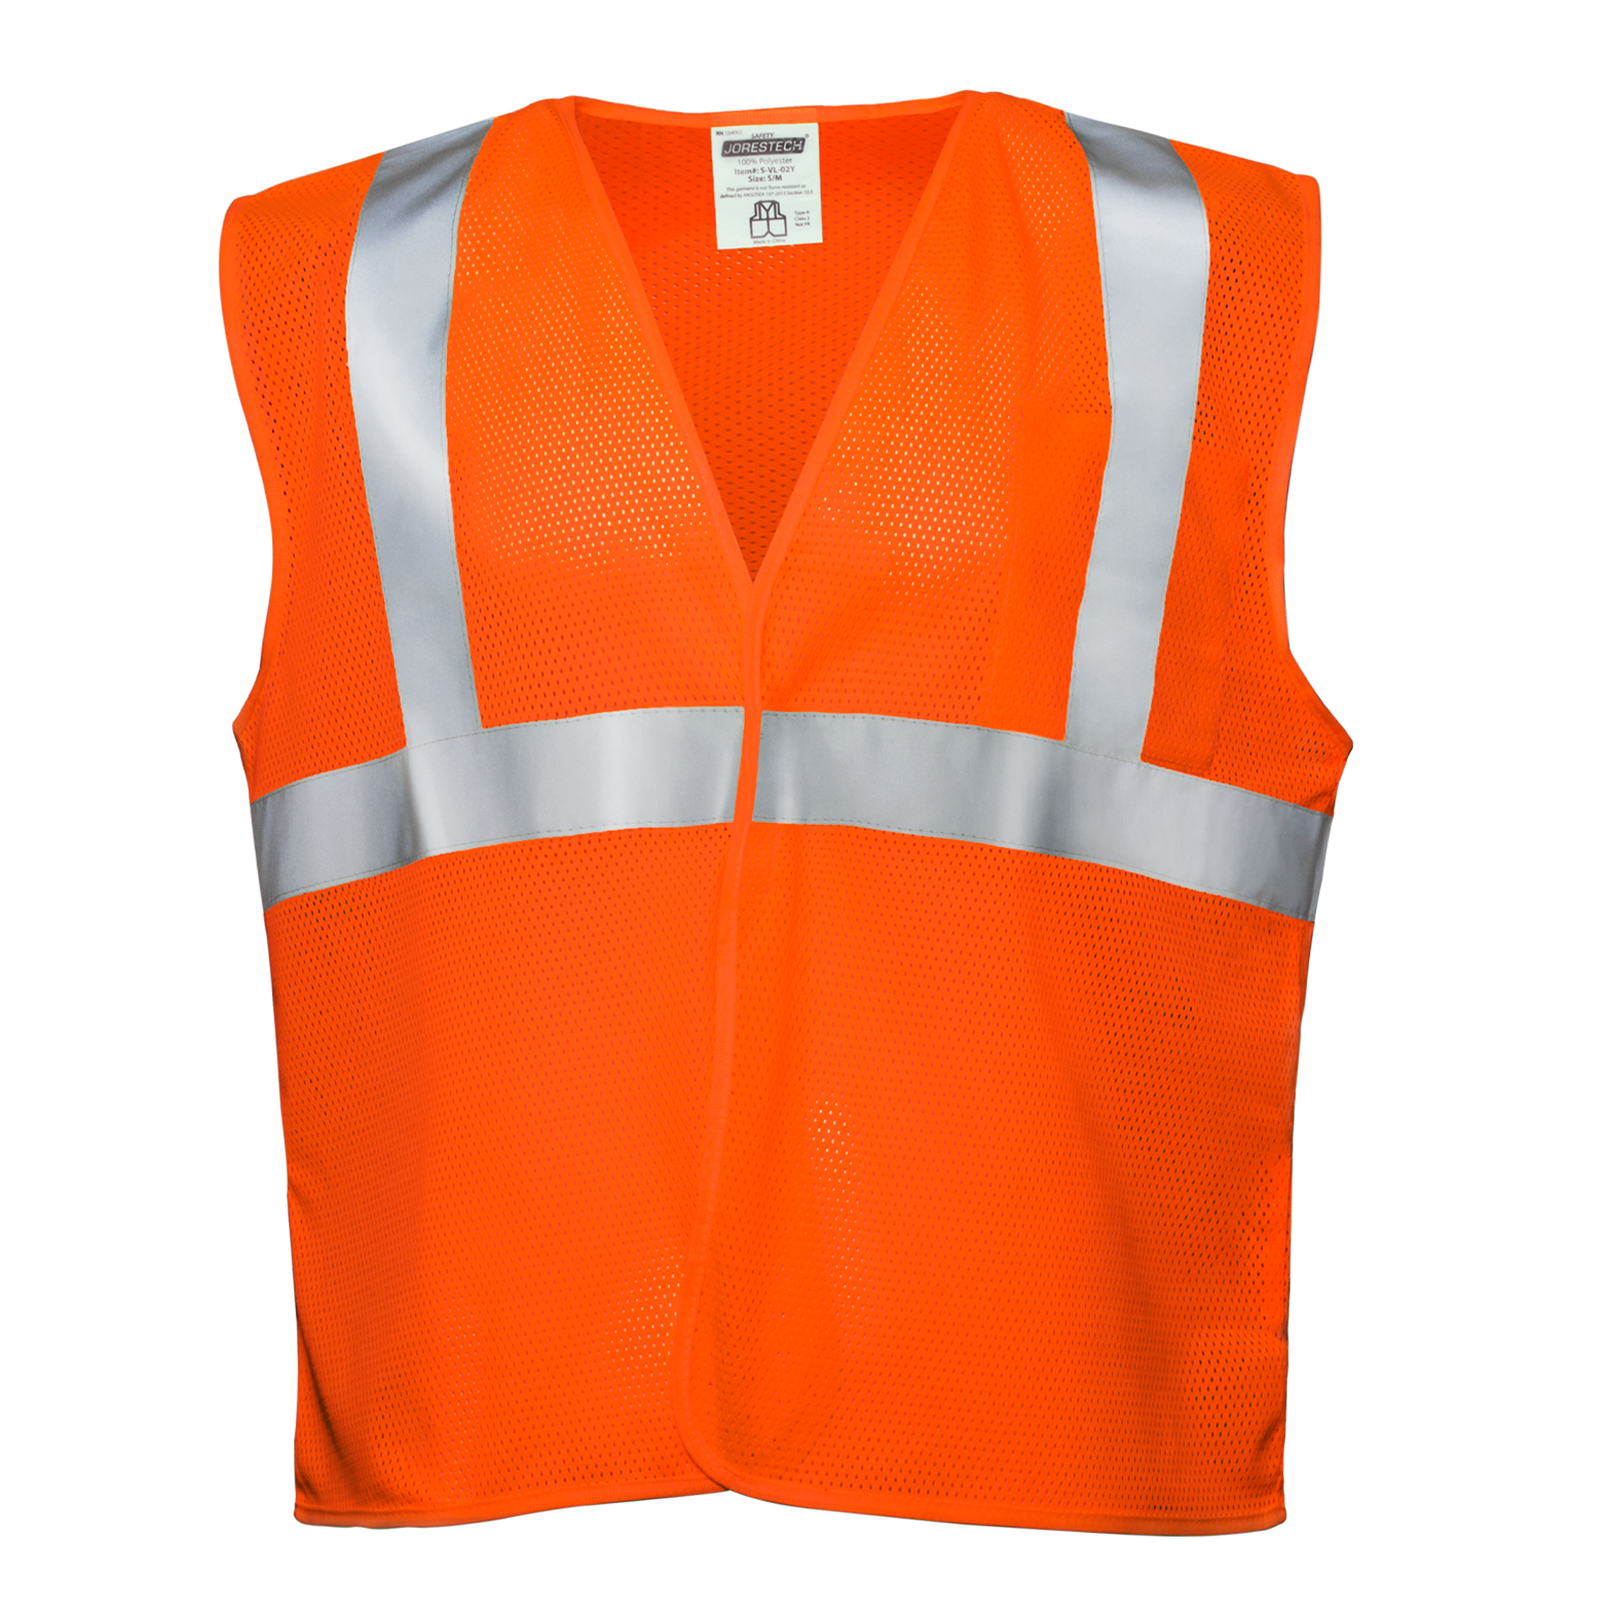 Front view of the JORESTECH printed hi-vis mesh orange safety vest with 2 inches reflective strips and pocket